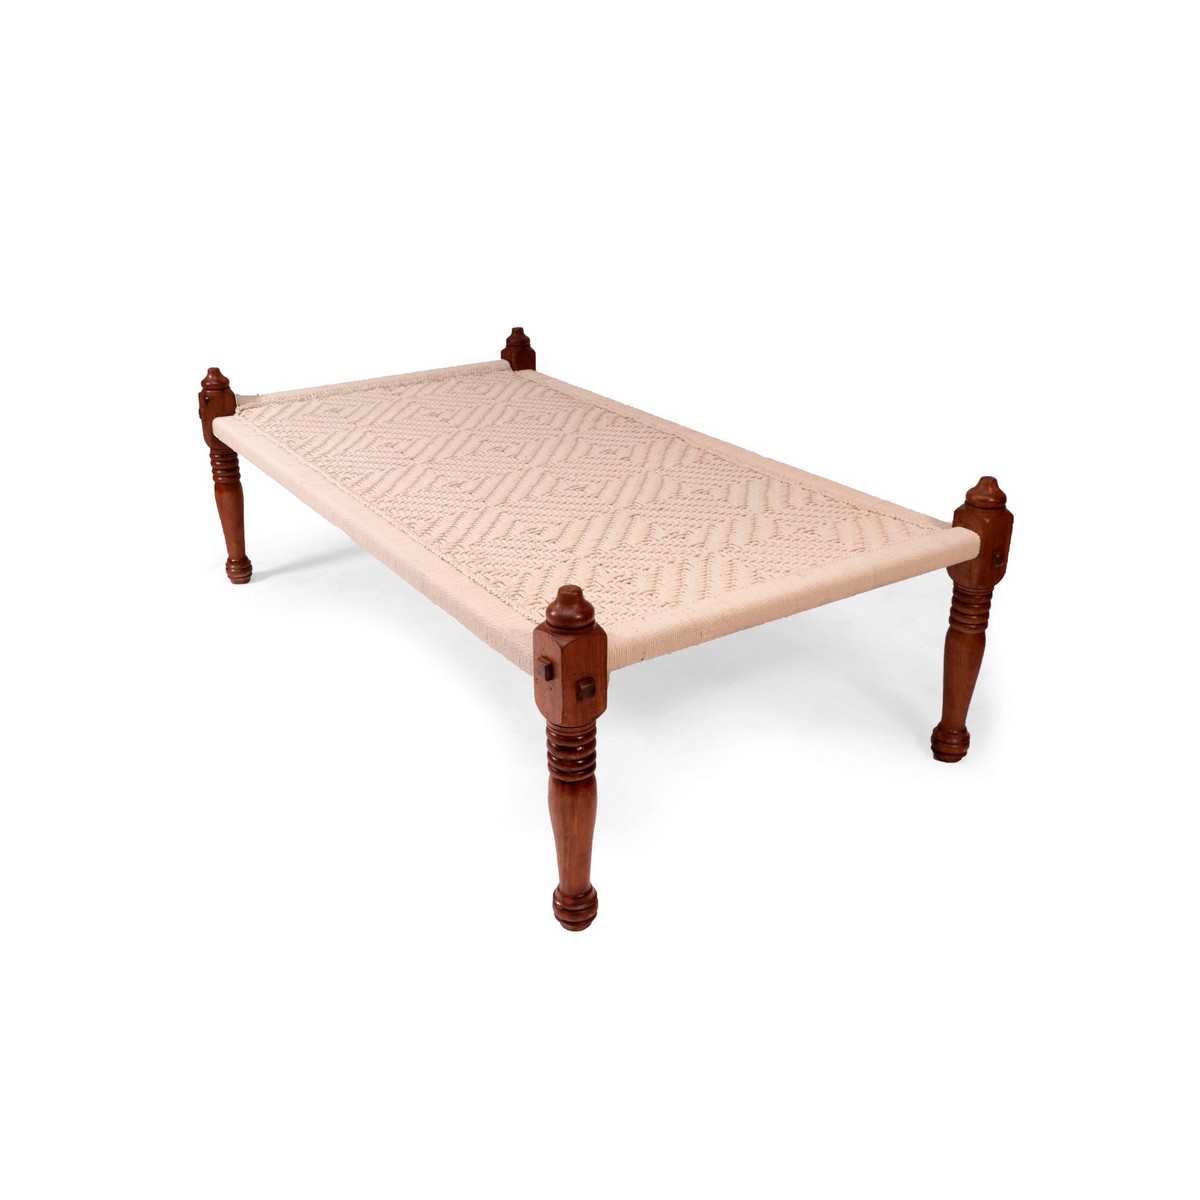 Ship by: 2 to 3 WeeksAssembly Required: Yes #Bed #ClassicalWeavedBed #DayBed #sheeshamwoodbed #StylishBed #WeavedBed #WeavedDayBed #WhiteWeaveIndianDayBed #WoodenDayBed

zugunu.com/product/wooden…